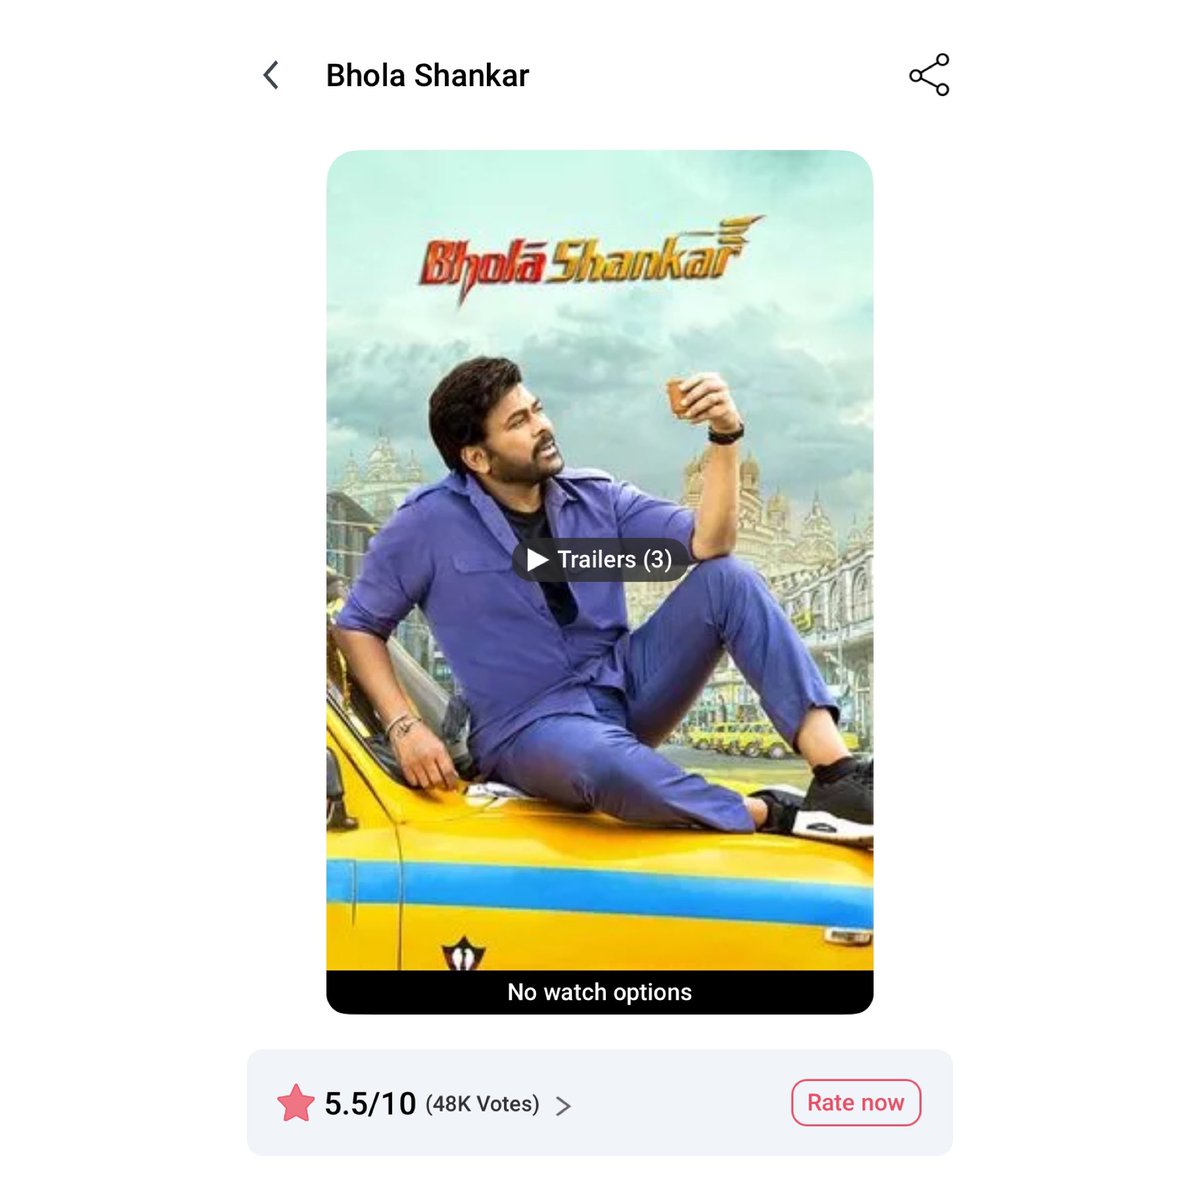 #BholaaShankar Movie Team Files Cyber Complaint Against Alleged Fake Votes on BookMyShow'.

The production team alleges that over 40,000 fake bot votes, with ratings of 0/1

We need Justice for #BholaaShankar